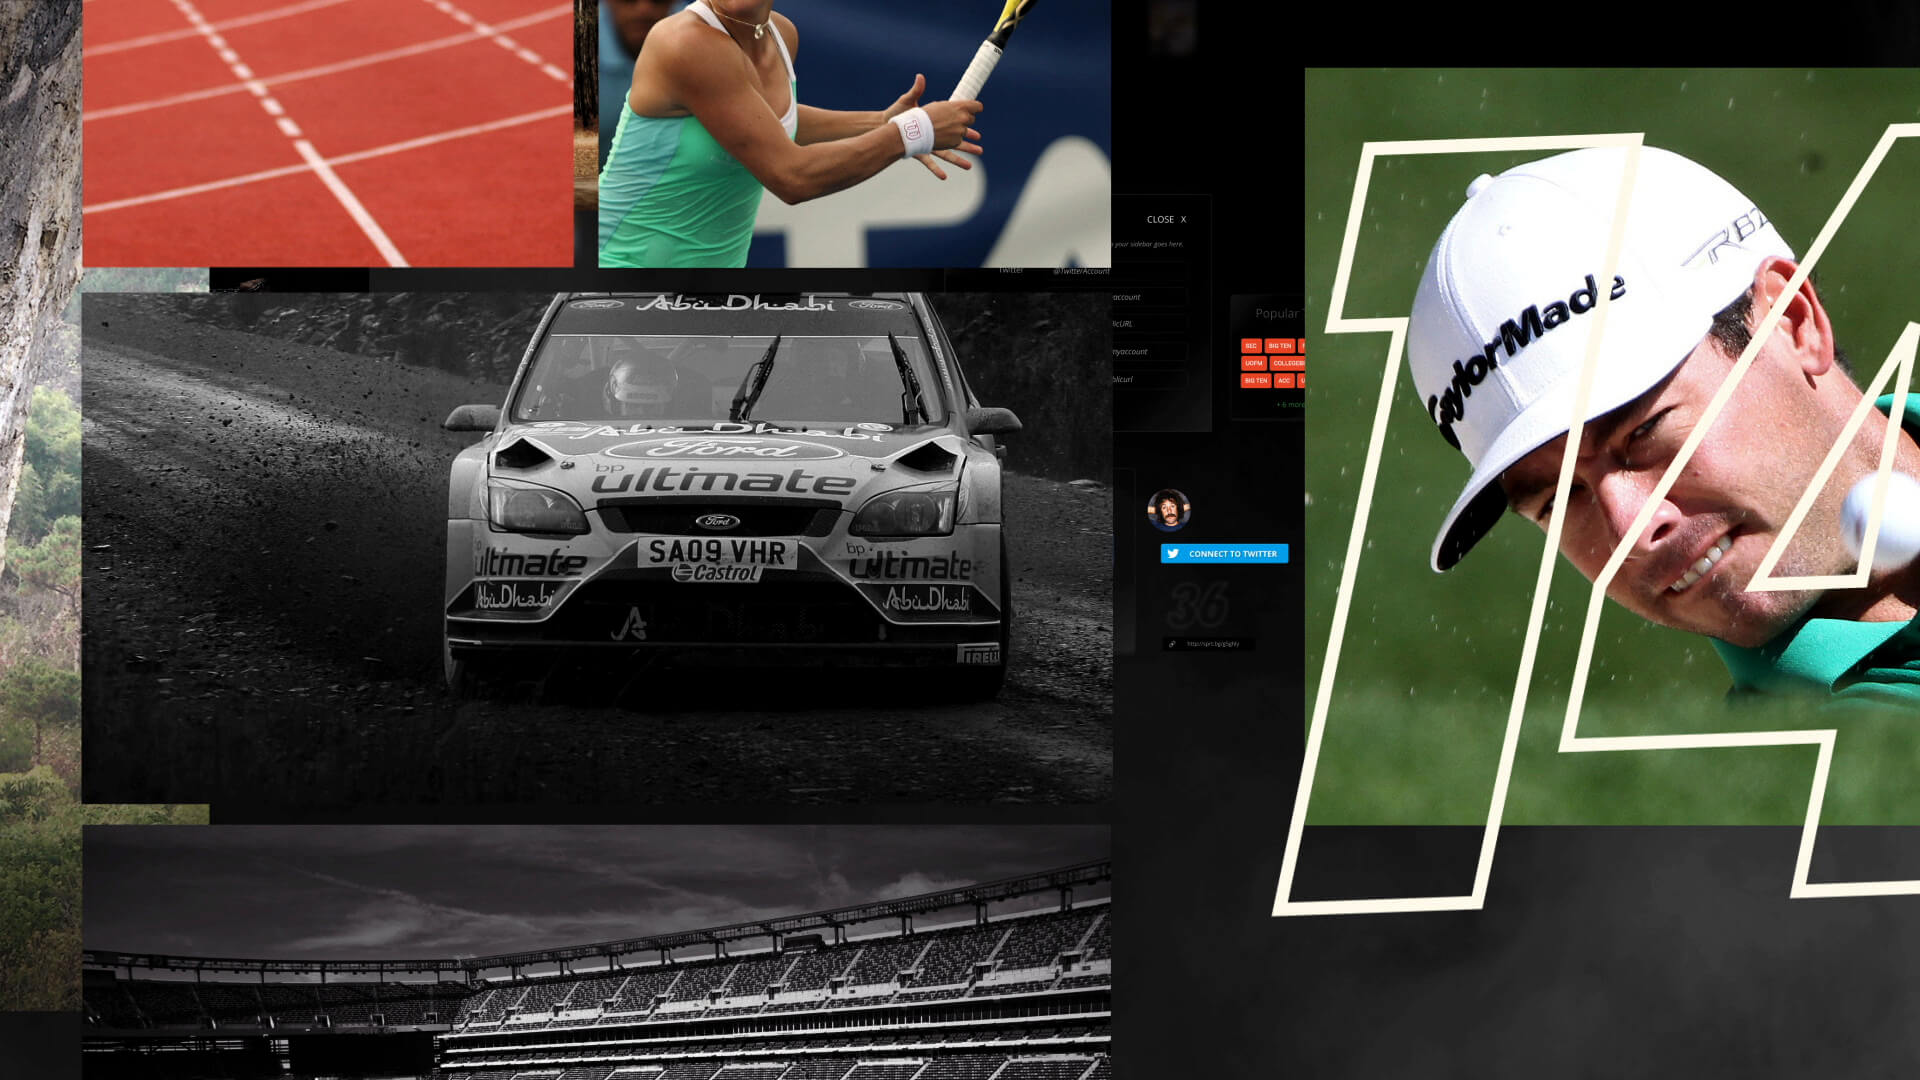 Action sports photo detail from Nashville, TN based Sportsblog web promo video designed and animated by Nashville's ST8MNT employing a stock photo world on smoky black of mountain climbers, track & field runners, tennis players, race car drivers, golfers and football stadiums